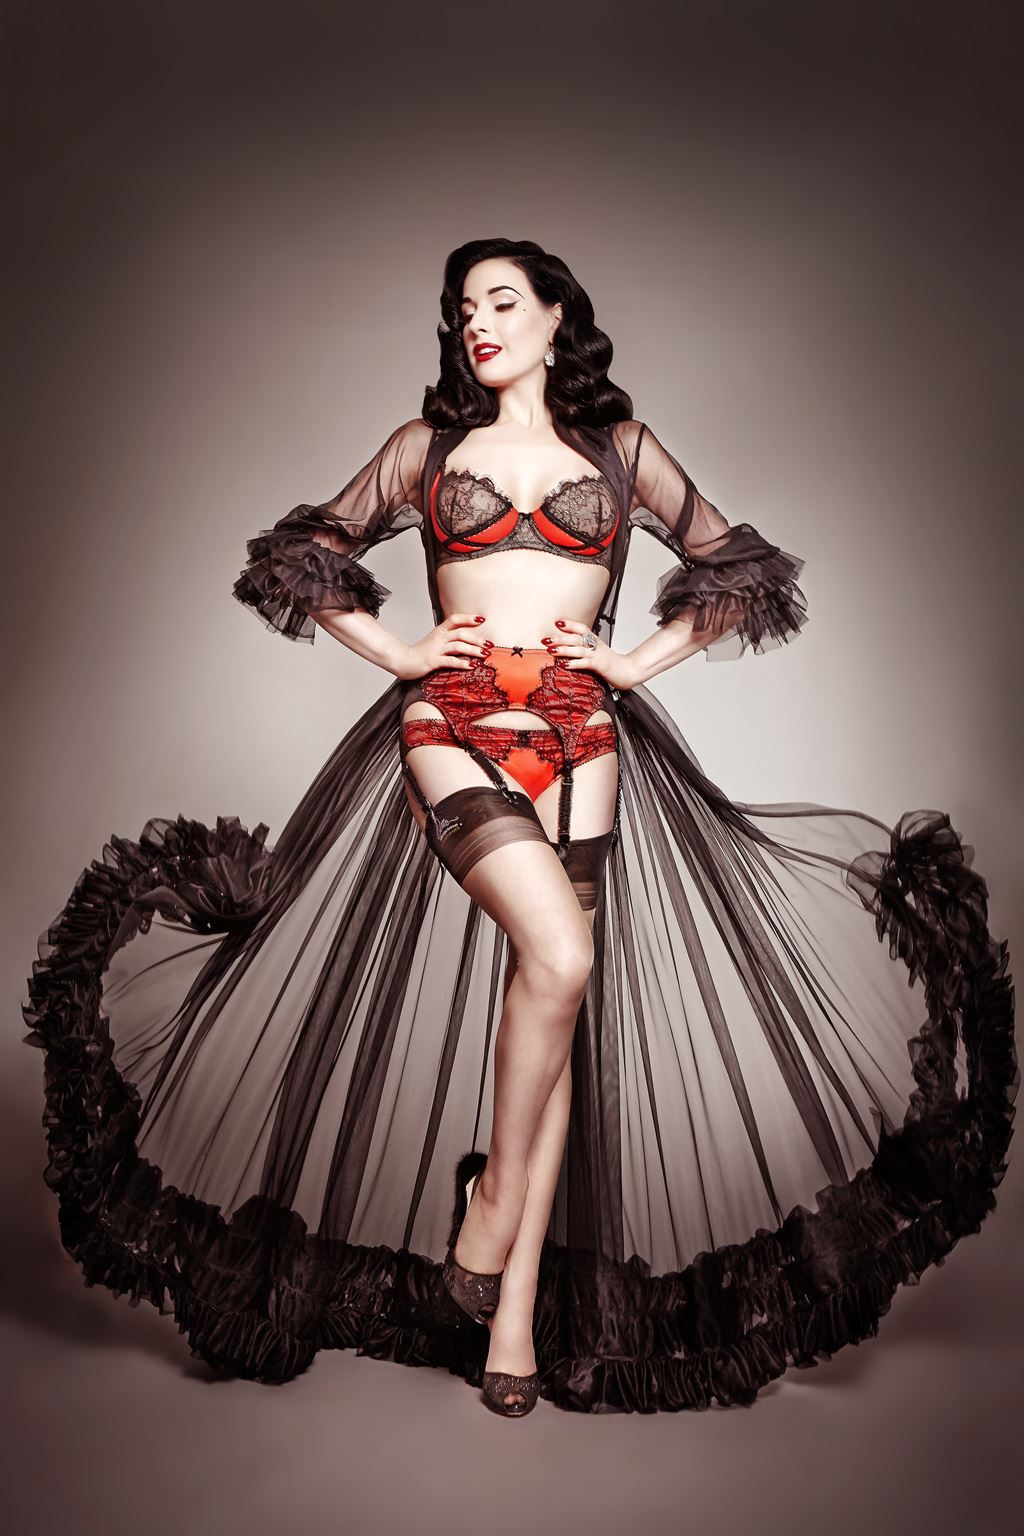 Dita Von Teese Grew Up Fascinated By The Golden Age Of Cinema Pin Up Imagery And Vintage